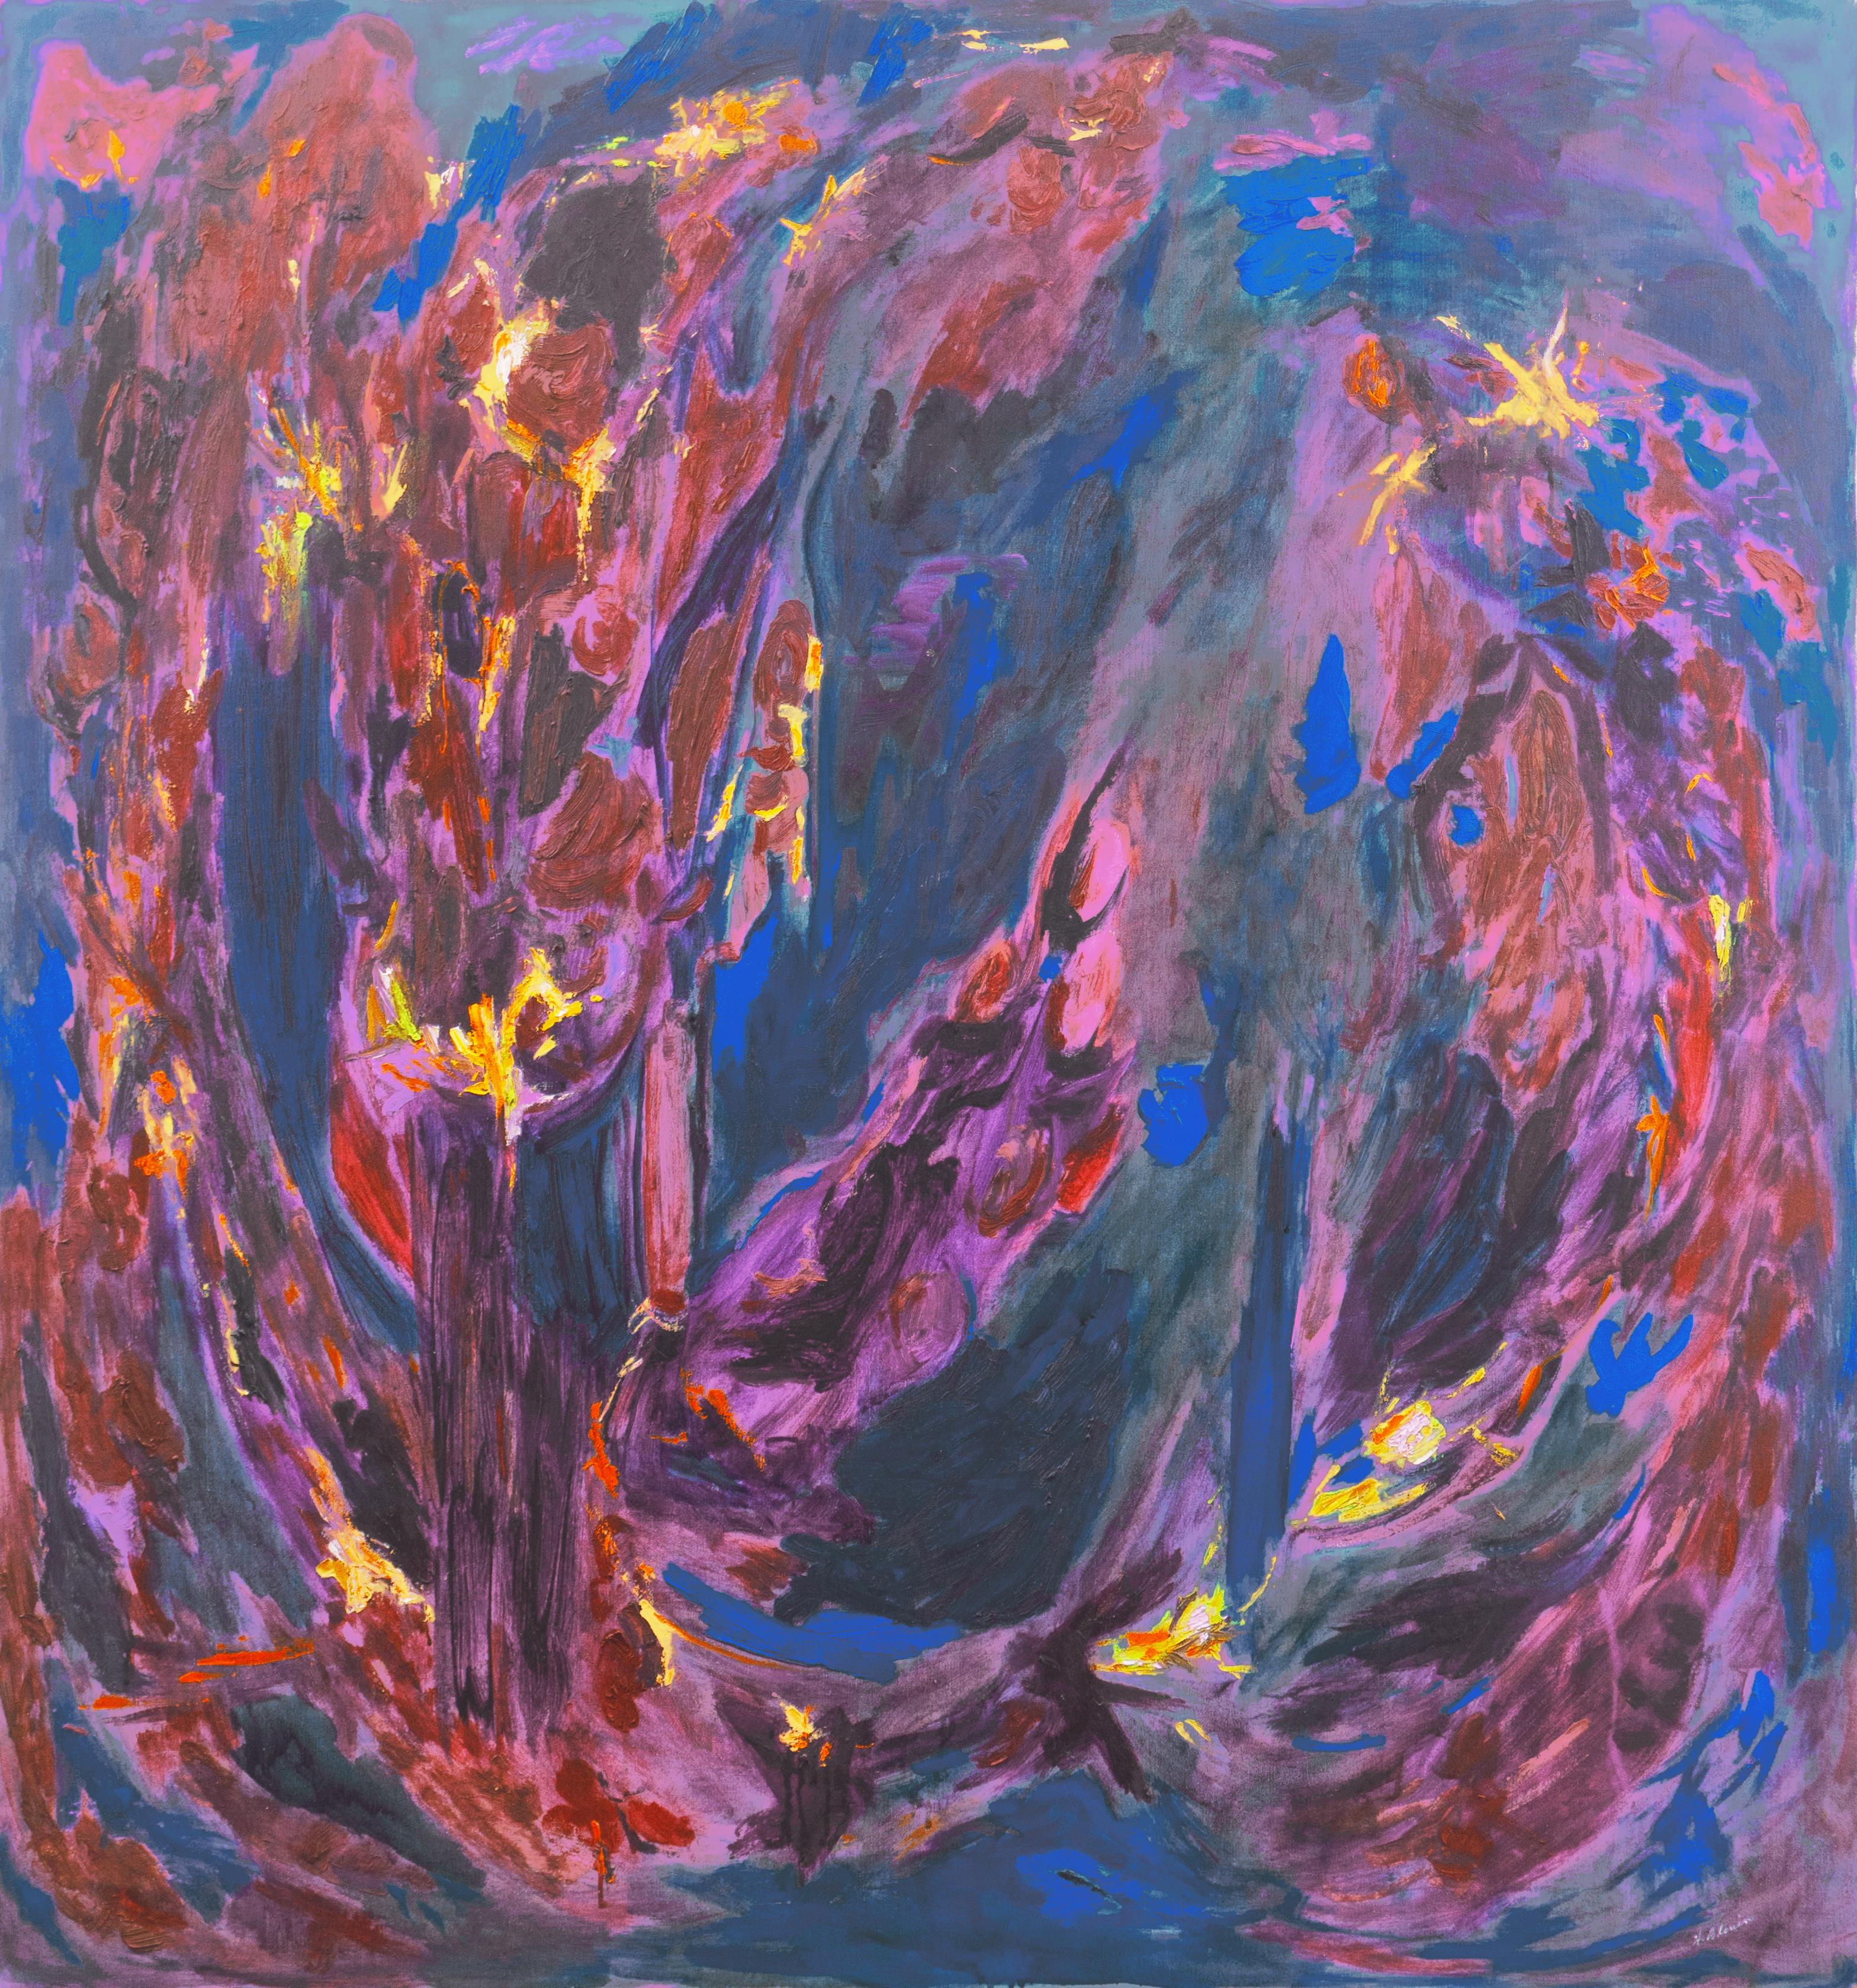 H. Blouin Abstract Painting - 'Abstract, Indigo and Violet', Large 1970's American Action Abstract Oil